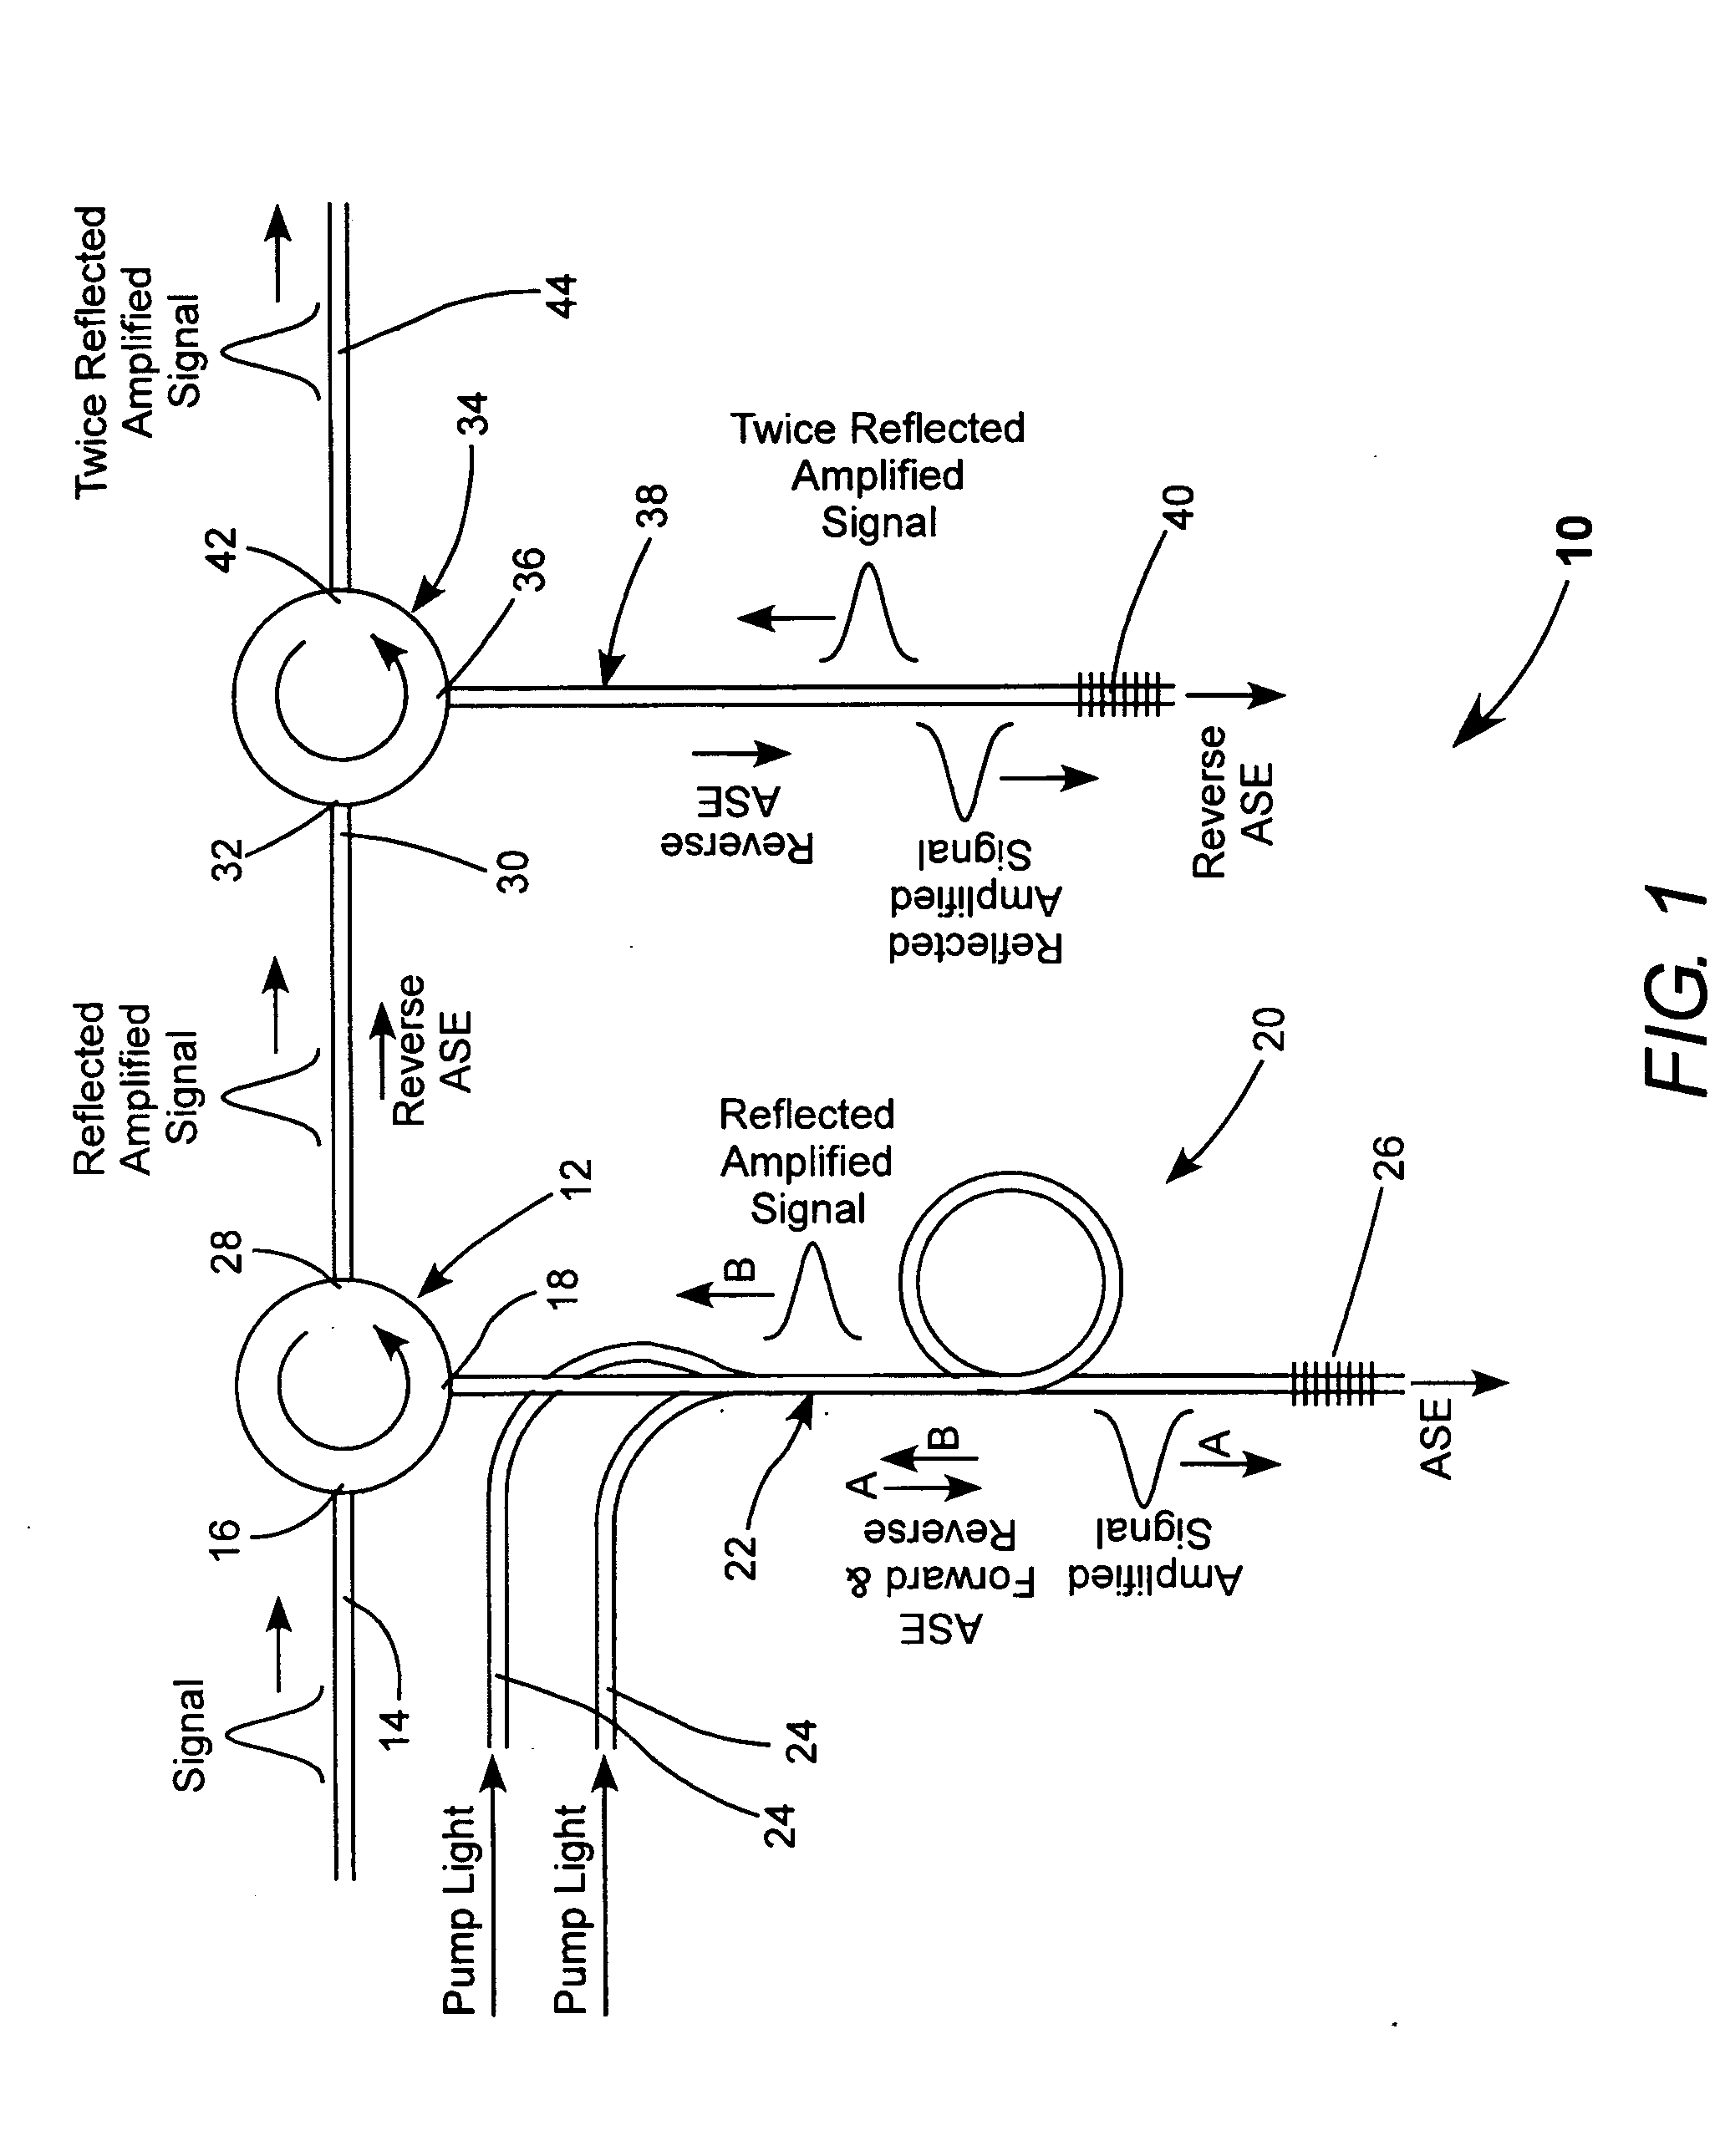 Fiber amplifier with suppression of amplified spontaneous emission